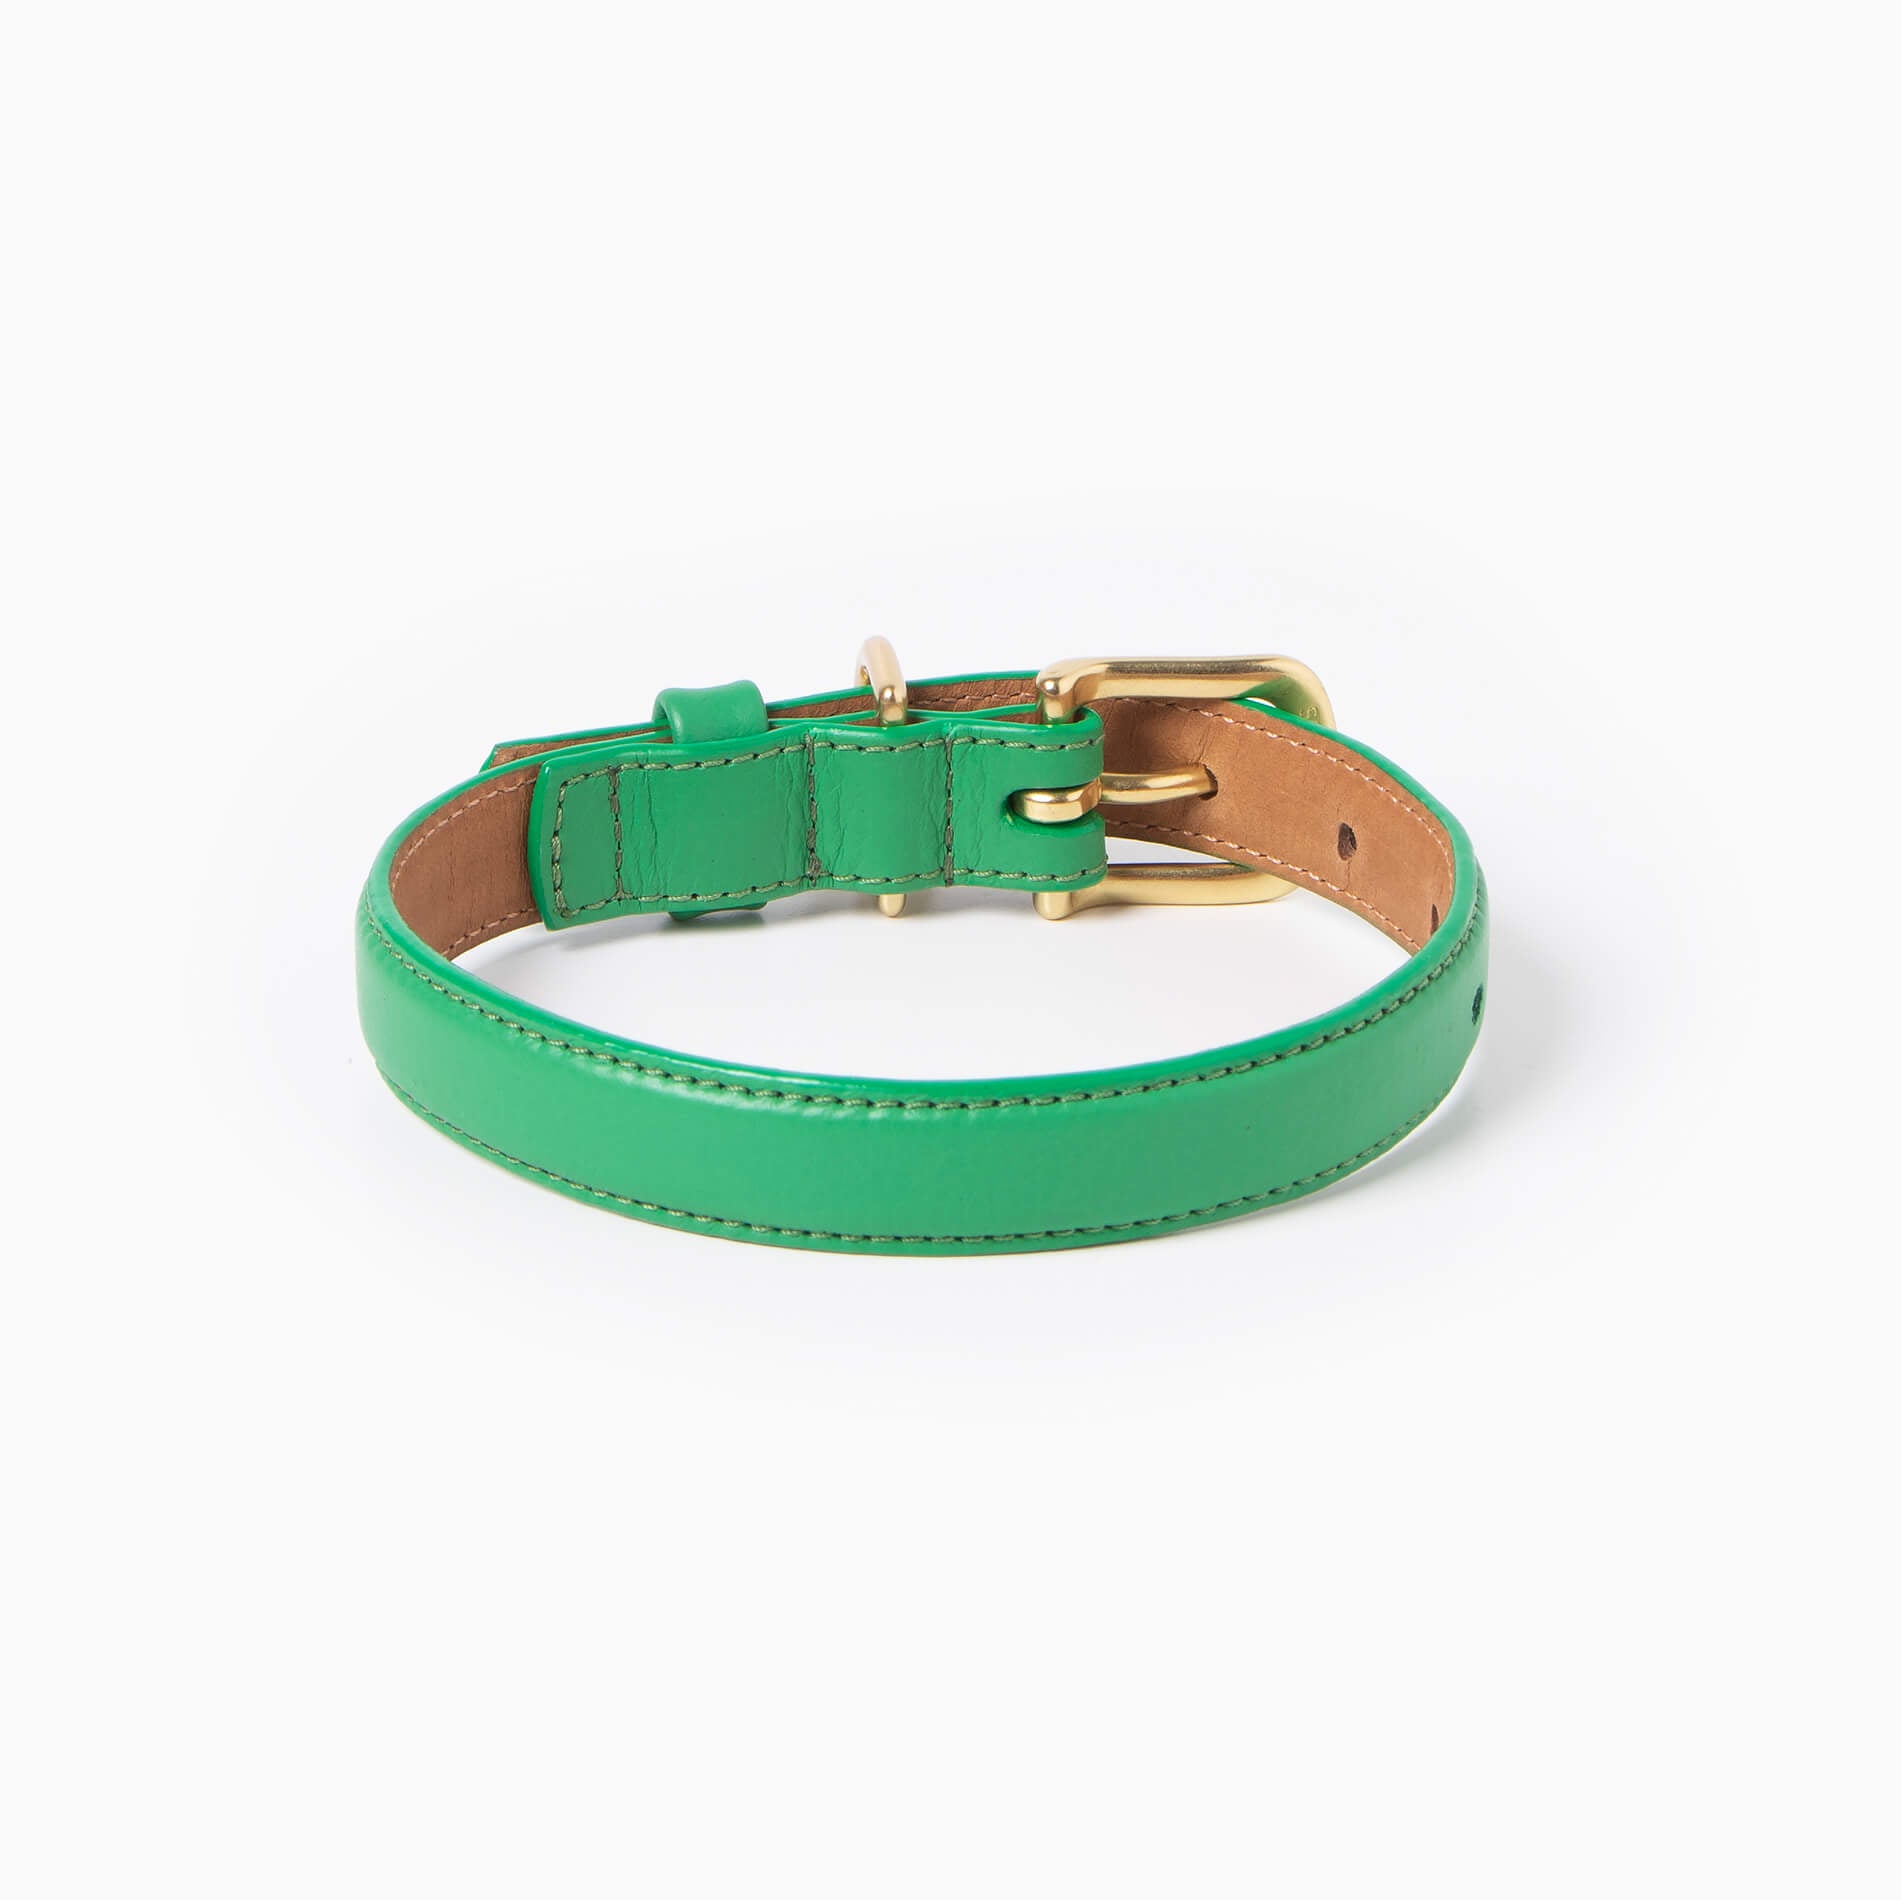 Emerald green leather dog collar with with brass hardware and tag ID. Luxury dog collar.